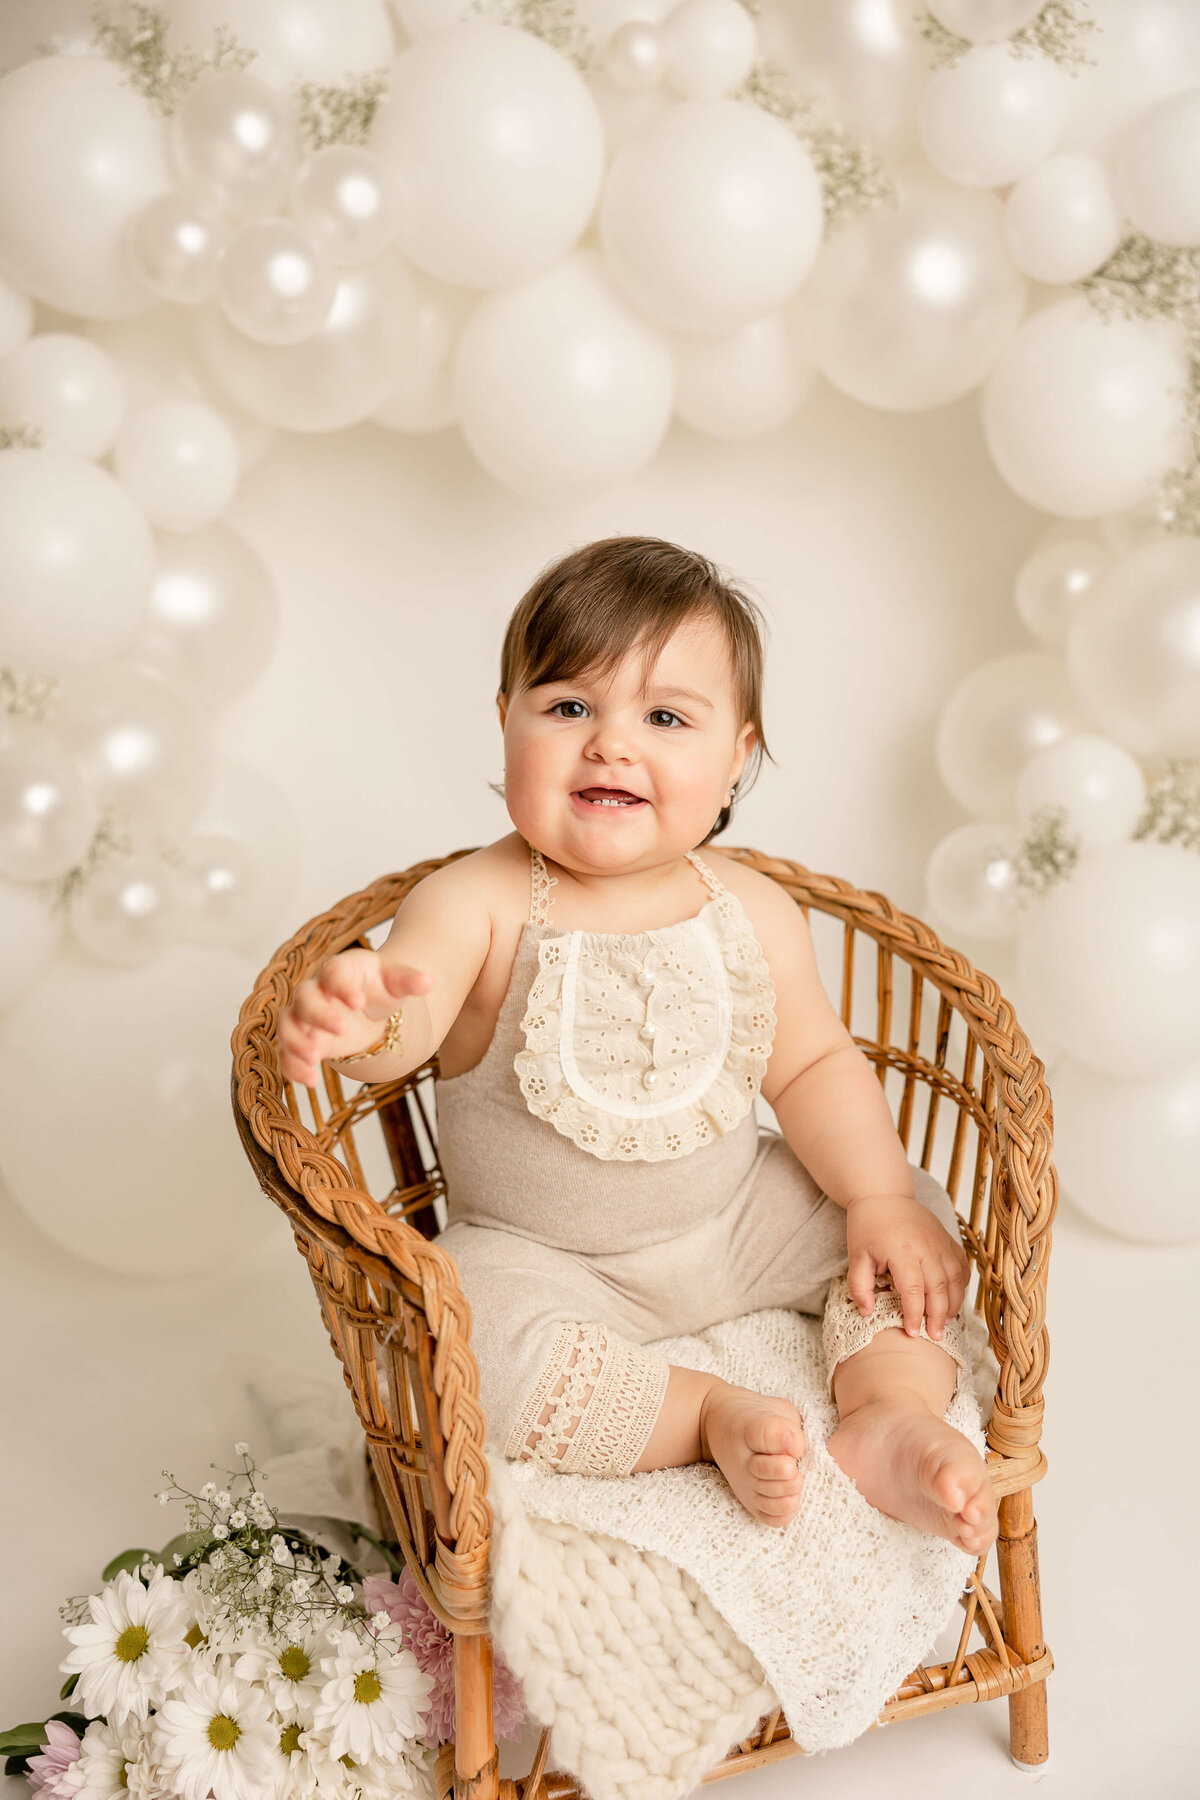 baby girl in cream romper sitting in chair in pdx for first birthday studio pictures. Taken by portland milestone photographer Ann Marshall